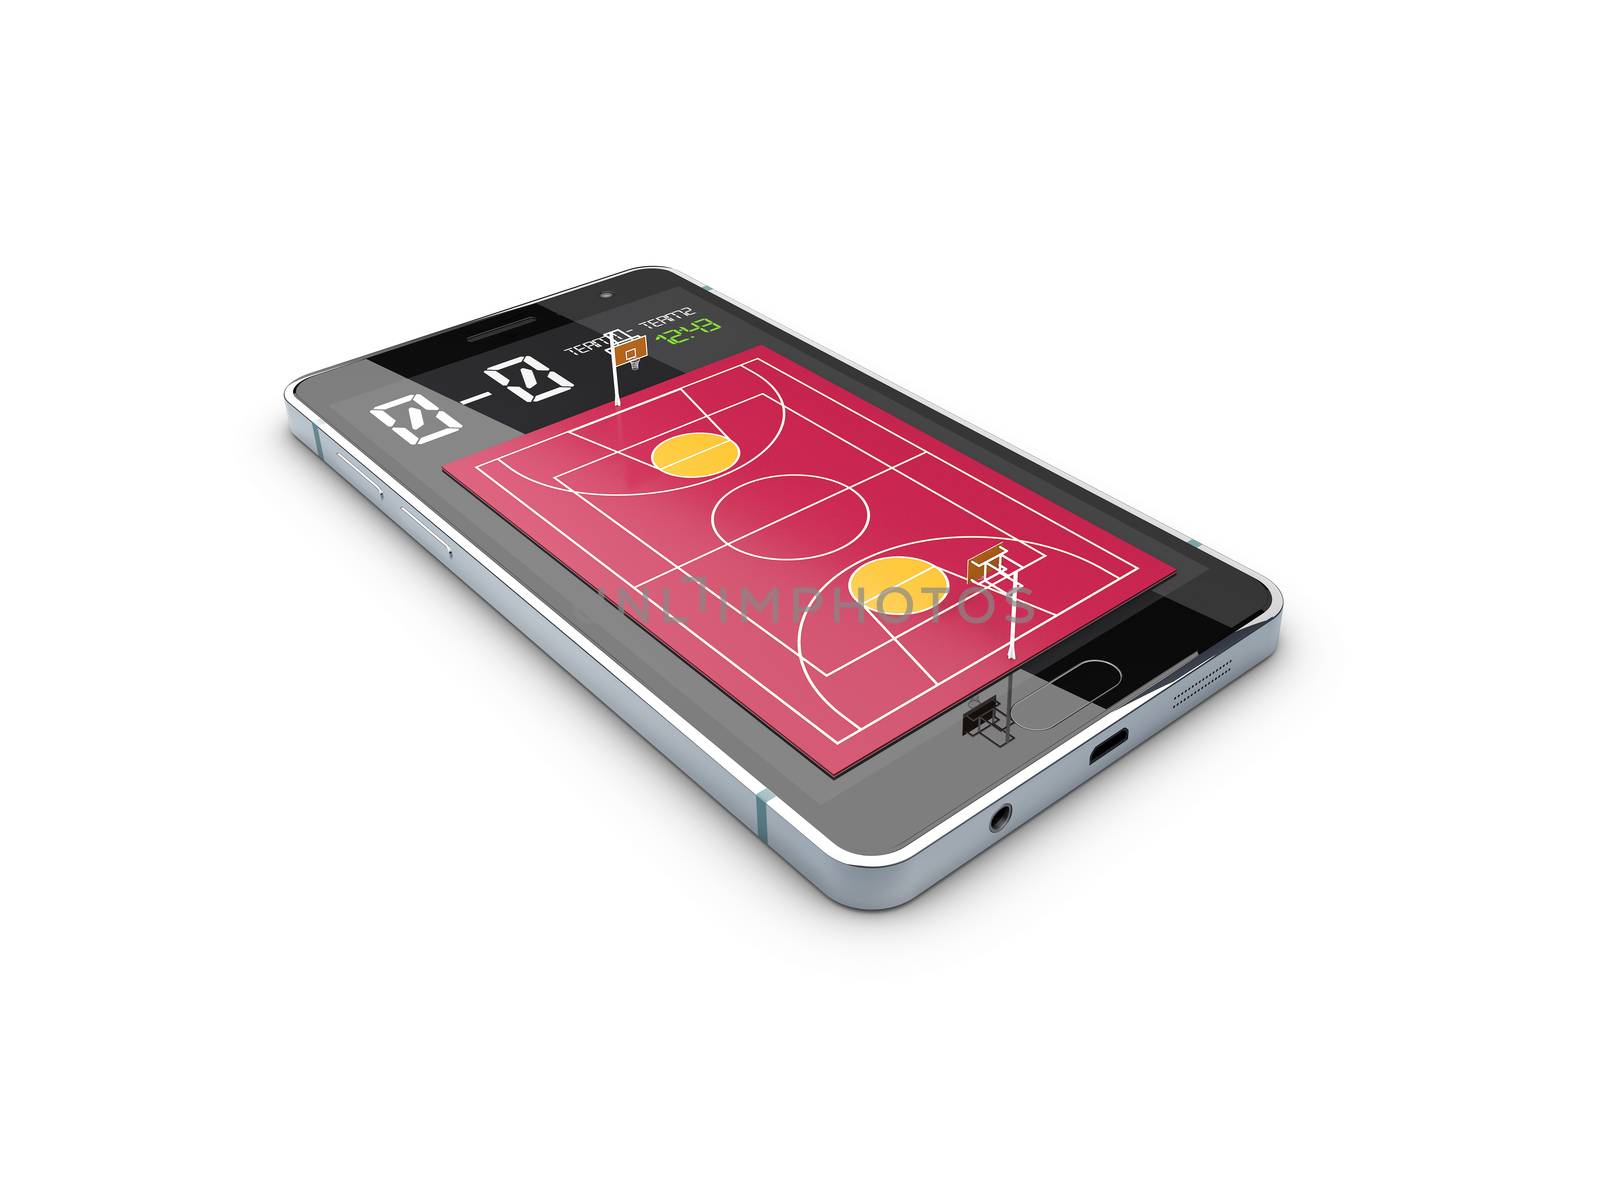 Smartphone with basketball ball and field on the screen. Sports theme and applications. 3d illustration by tussik